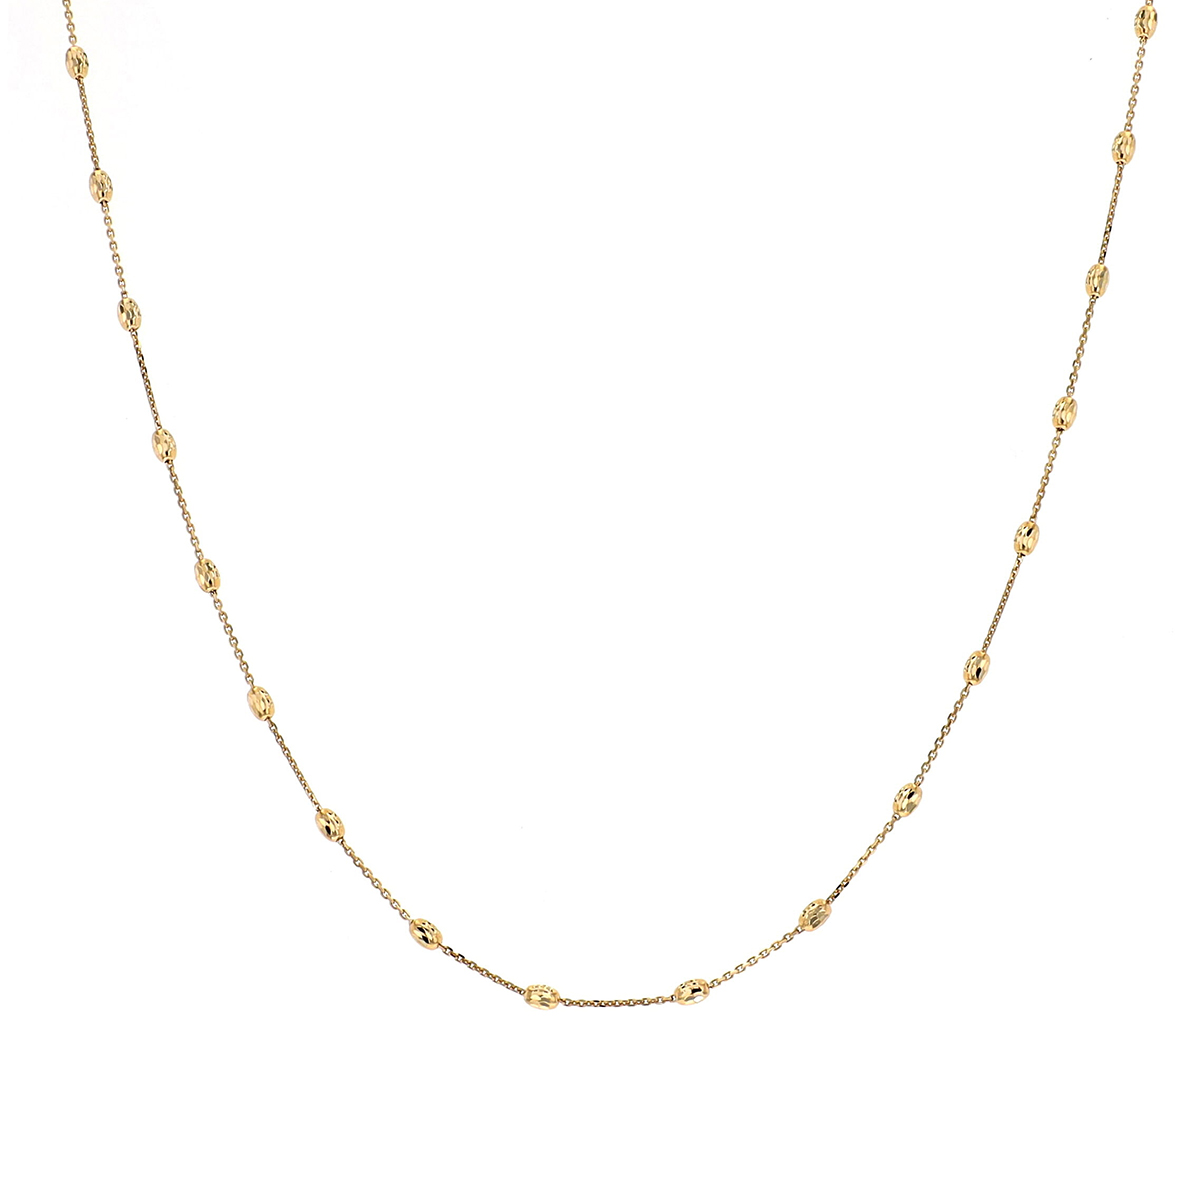 18K Yellow Gold Station Necklace